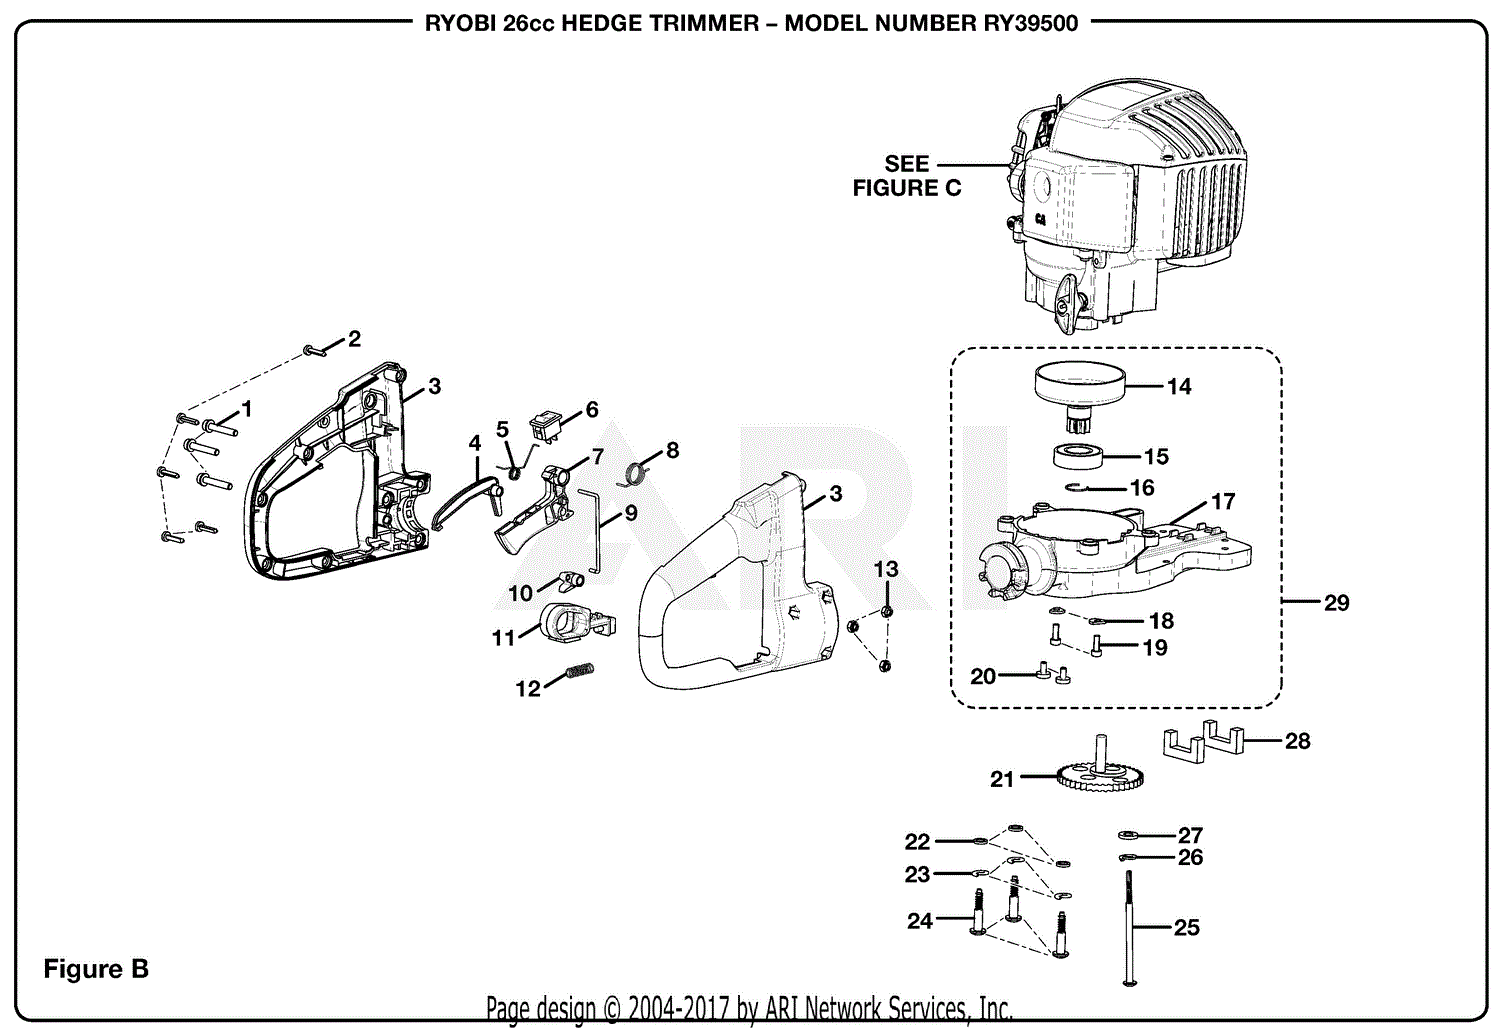 Homelite Ry39500 26cc Hedge Trimmer Parts Diagram For Figure B